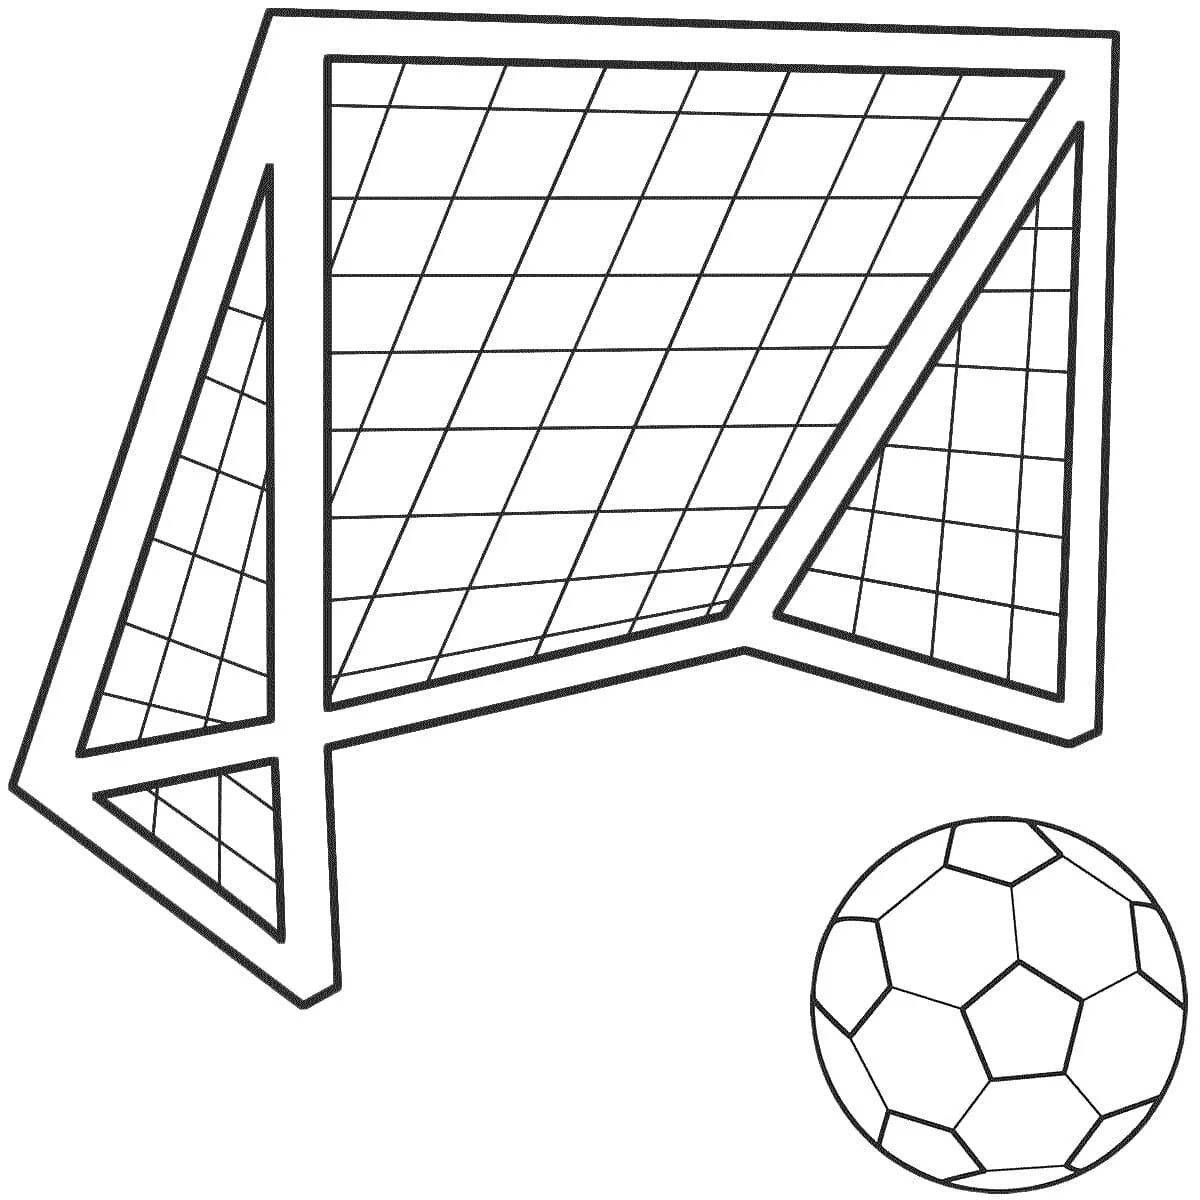 Fun soccer ball coloring for kids